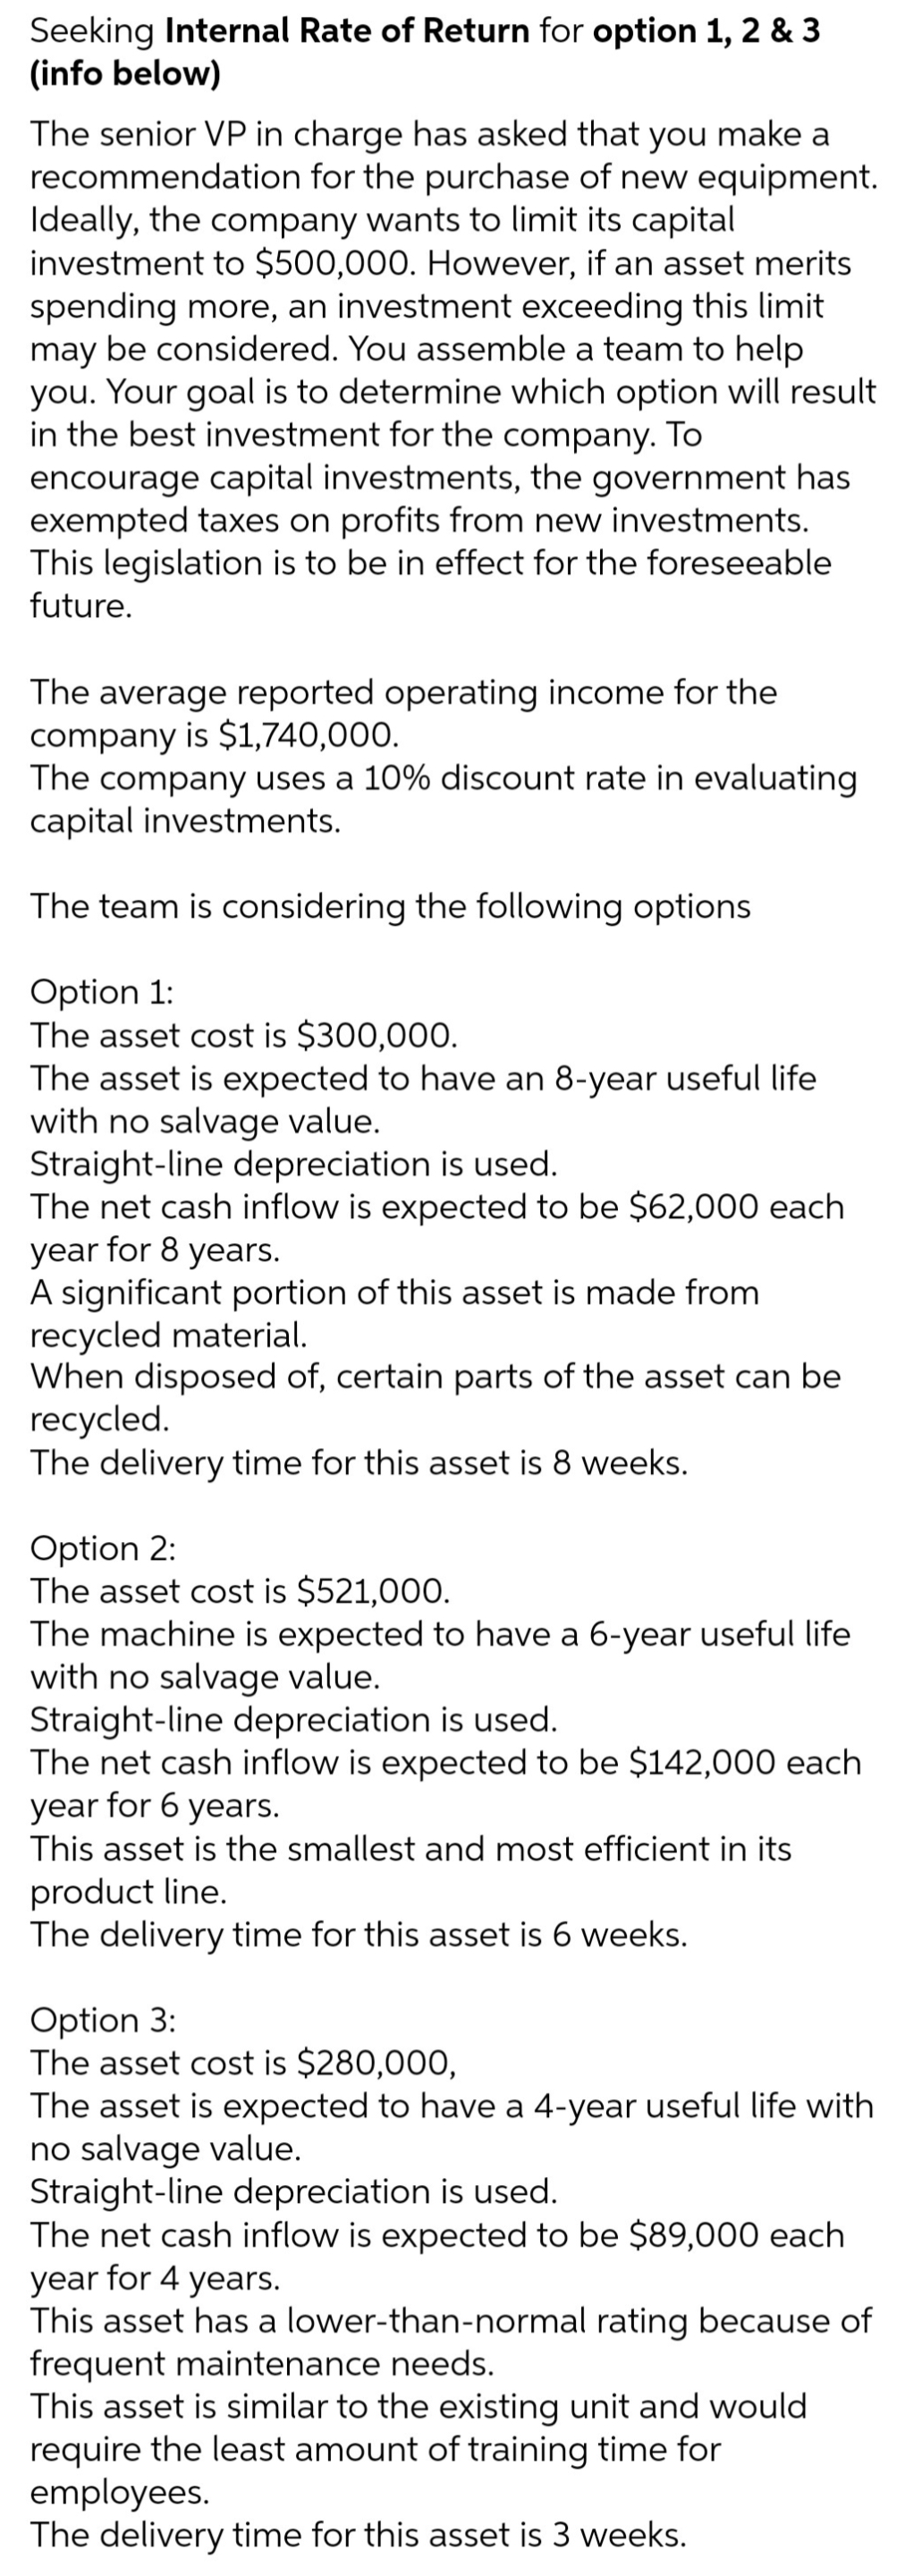 Seeking Internal Rate of Return for option 1, 2 & 3
(info below)
The senior VP in charge has asked that you make a
recommendation for the purchase of new equipment.
Ideally, the company wants to limit its capital
investment to $500,000. However, if an asset merits
spending more, an investment exceeding this limit
may be considered. You assemble a team to help
you. Your goal is to determine which option will result
in the best investment for the company. To
encourage capital investments, the government has
exempted taxes on profits from new investments.
This legislation is to be in effect for the foreseeable
future.
The average reported operating income for the
company is $1,740,000.
The company uses a 10% discount rate in evaluating
capital investments.
The team is considering the following options
Option 1:
The asset cost is $300,000.
The asset is expected to have an 8-year useful life
with no salvage value.
Straight-line depreciation is used.
The net cash inflow is expected to be $62,000 each
year for 8 years.
A significant portion of this asset is made from
recycled material.
When disposed of, certain parts of the asset can be
recycled.
The delivery time for this asset is 8 weeks.
Option 2:
The asset cost is $521,000.
The machine is expected to have a 6-year useful life
with no salvage value.
Straight-line depreciation is used.
The net cash inflow is expected to be $142,000 each
year for 6 years.
This asset is the smallest and most efficient in its
product line.
The delivery time for this asset is 6 weeks.
Option 3:
The asset cost is $280,000,
The asset is expected to have a 4-year useful life with
no salvage value.
Straight-line depreciation is used.
The net cash inflow is expected to be $89,000 each
year for 4 years.
This asset has a lower-than-normal rating because of
frequent maintenance needs.
This asset is similar to the existing unit and would
require the least amount of training time for
employees.
The delivery time for this asset is 3 weeks.